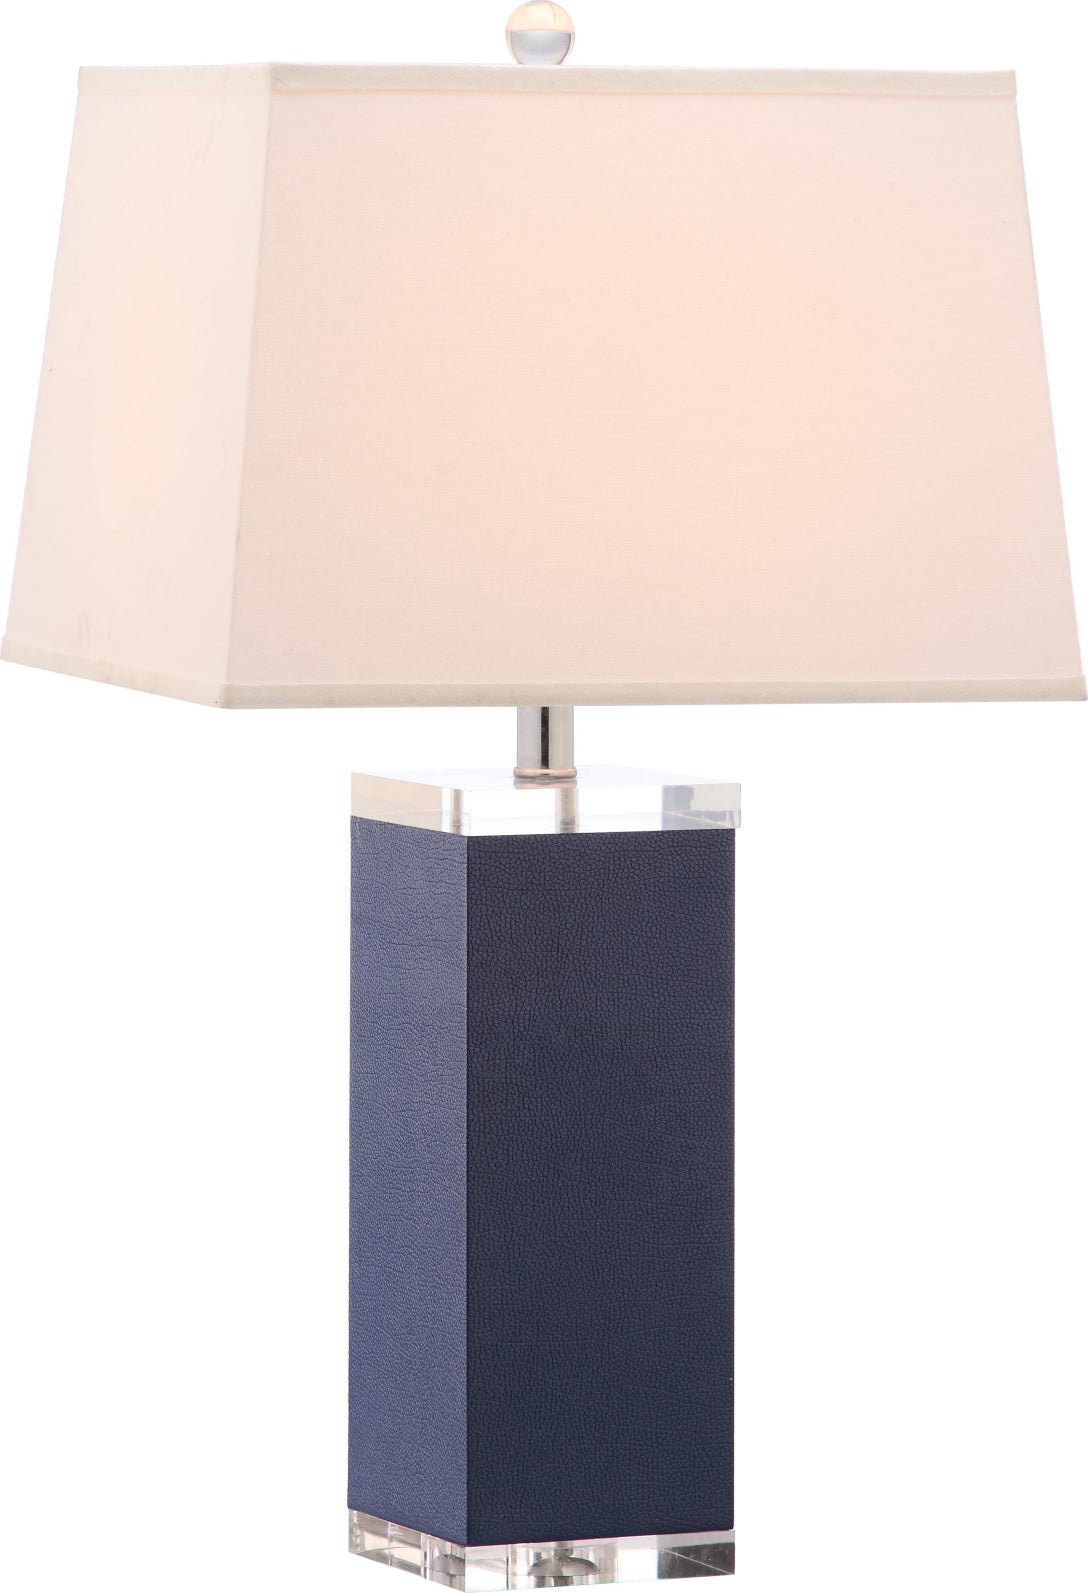 Safavieh Deco 27-Inch H Leather Table Lamp Navy main image